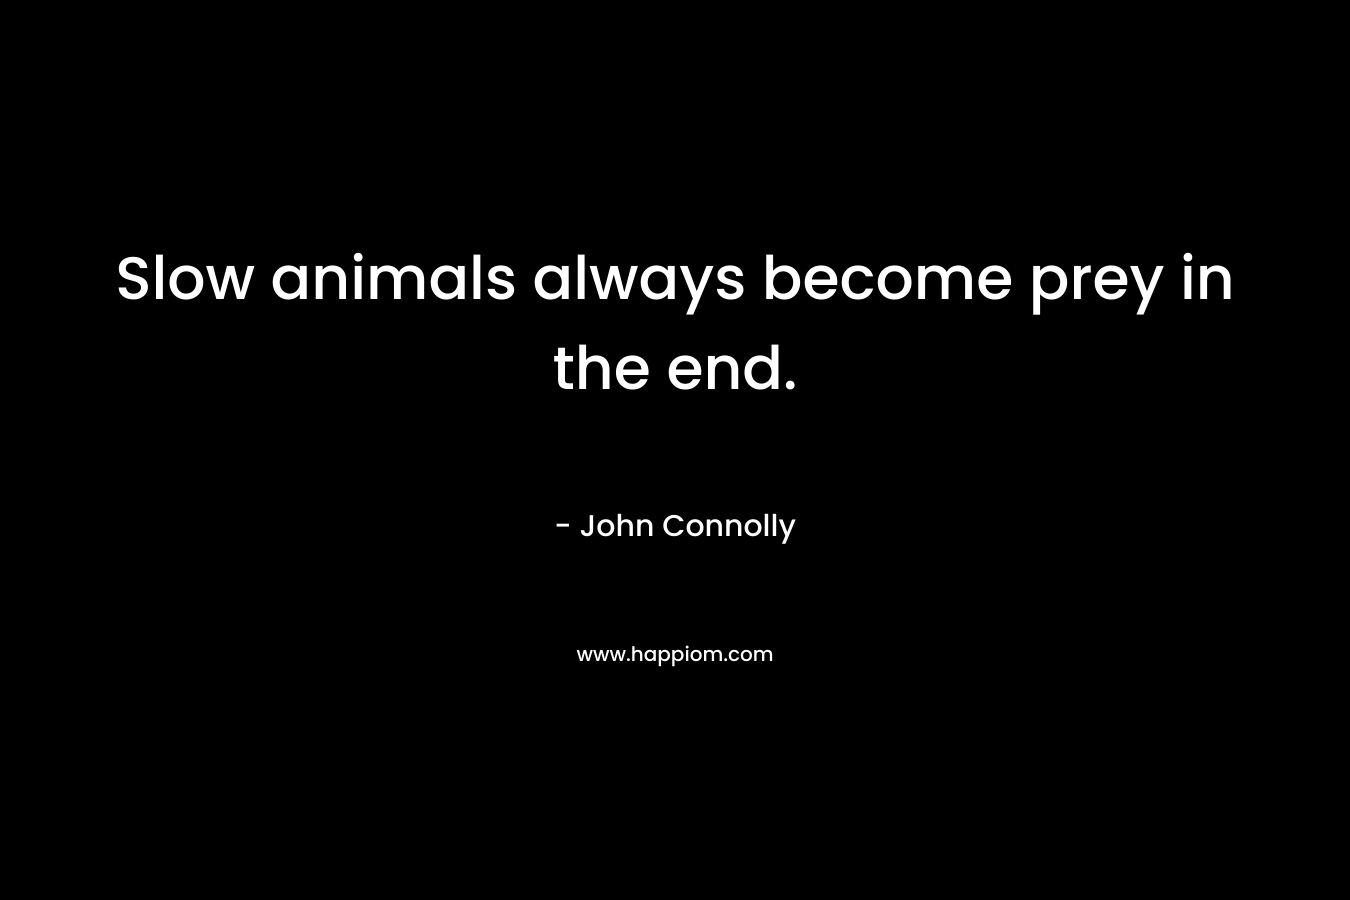 Slow animals always become prey in the end. – John Connolly